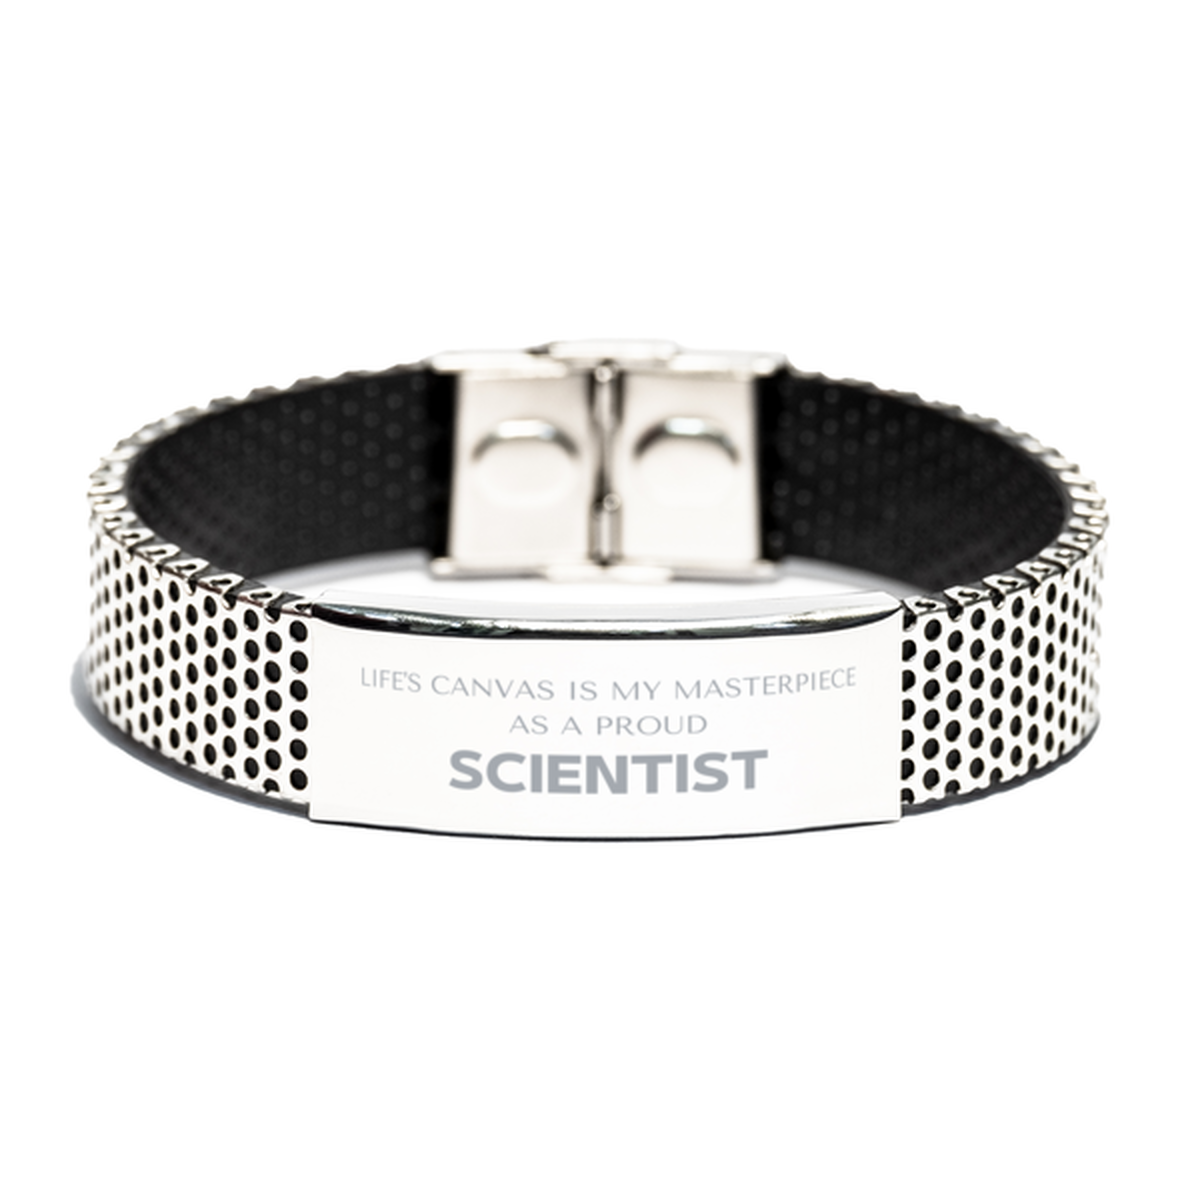 Proud Scientist Gifts, Life's canvas is my masterpiece, Epic Birthday Christmas Unique Stainless Steel Bracelet For Scientist, Coworkers, Men, Women, Friends